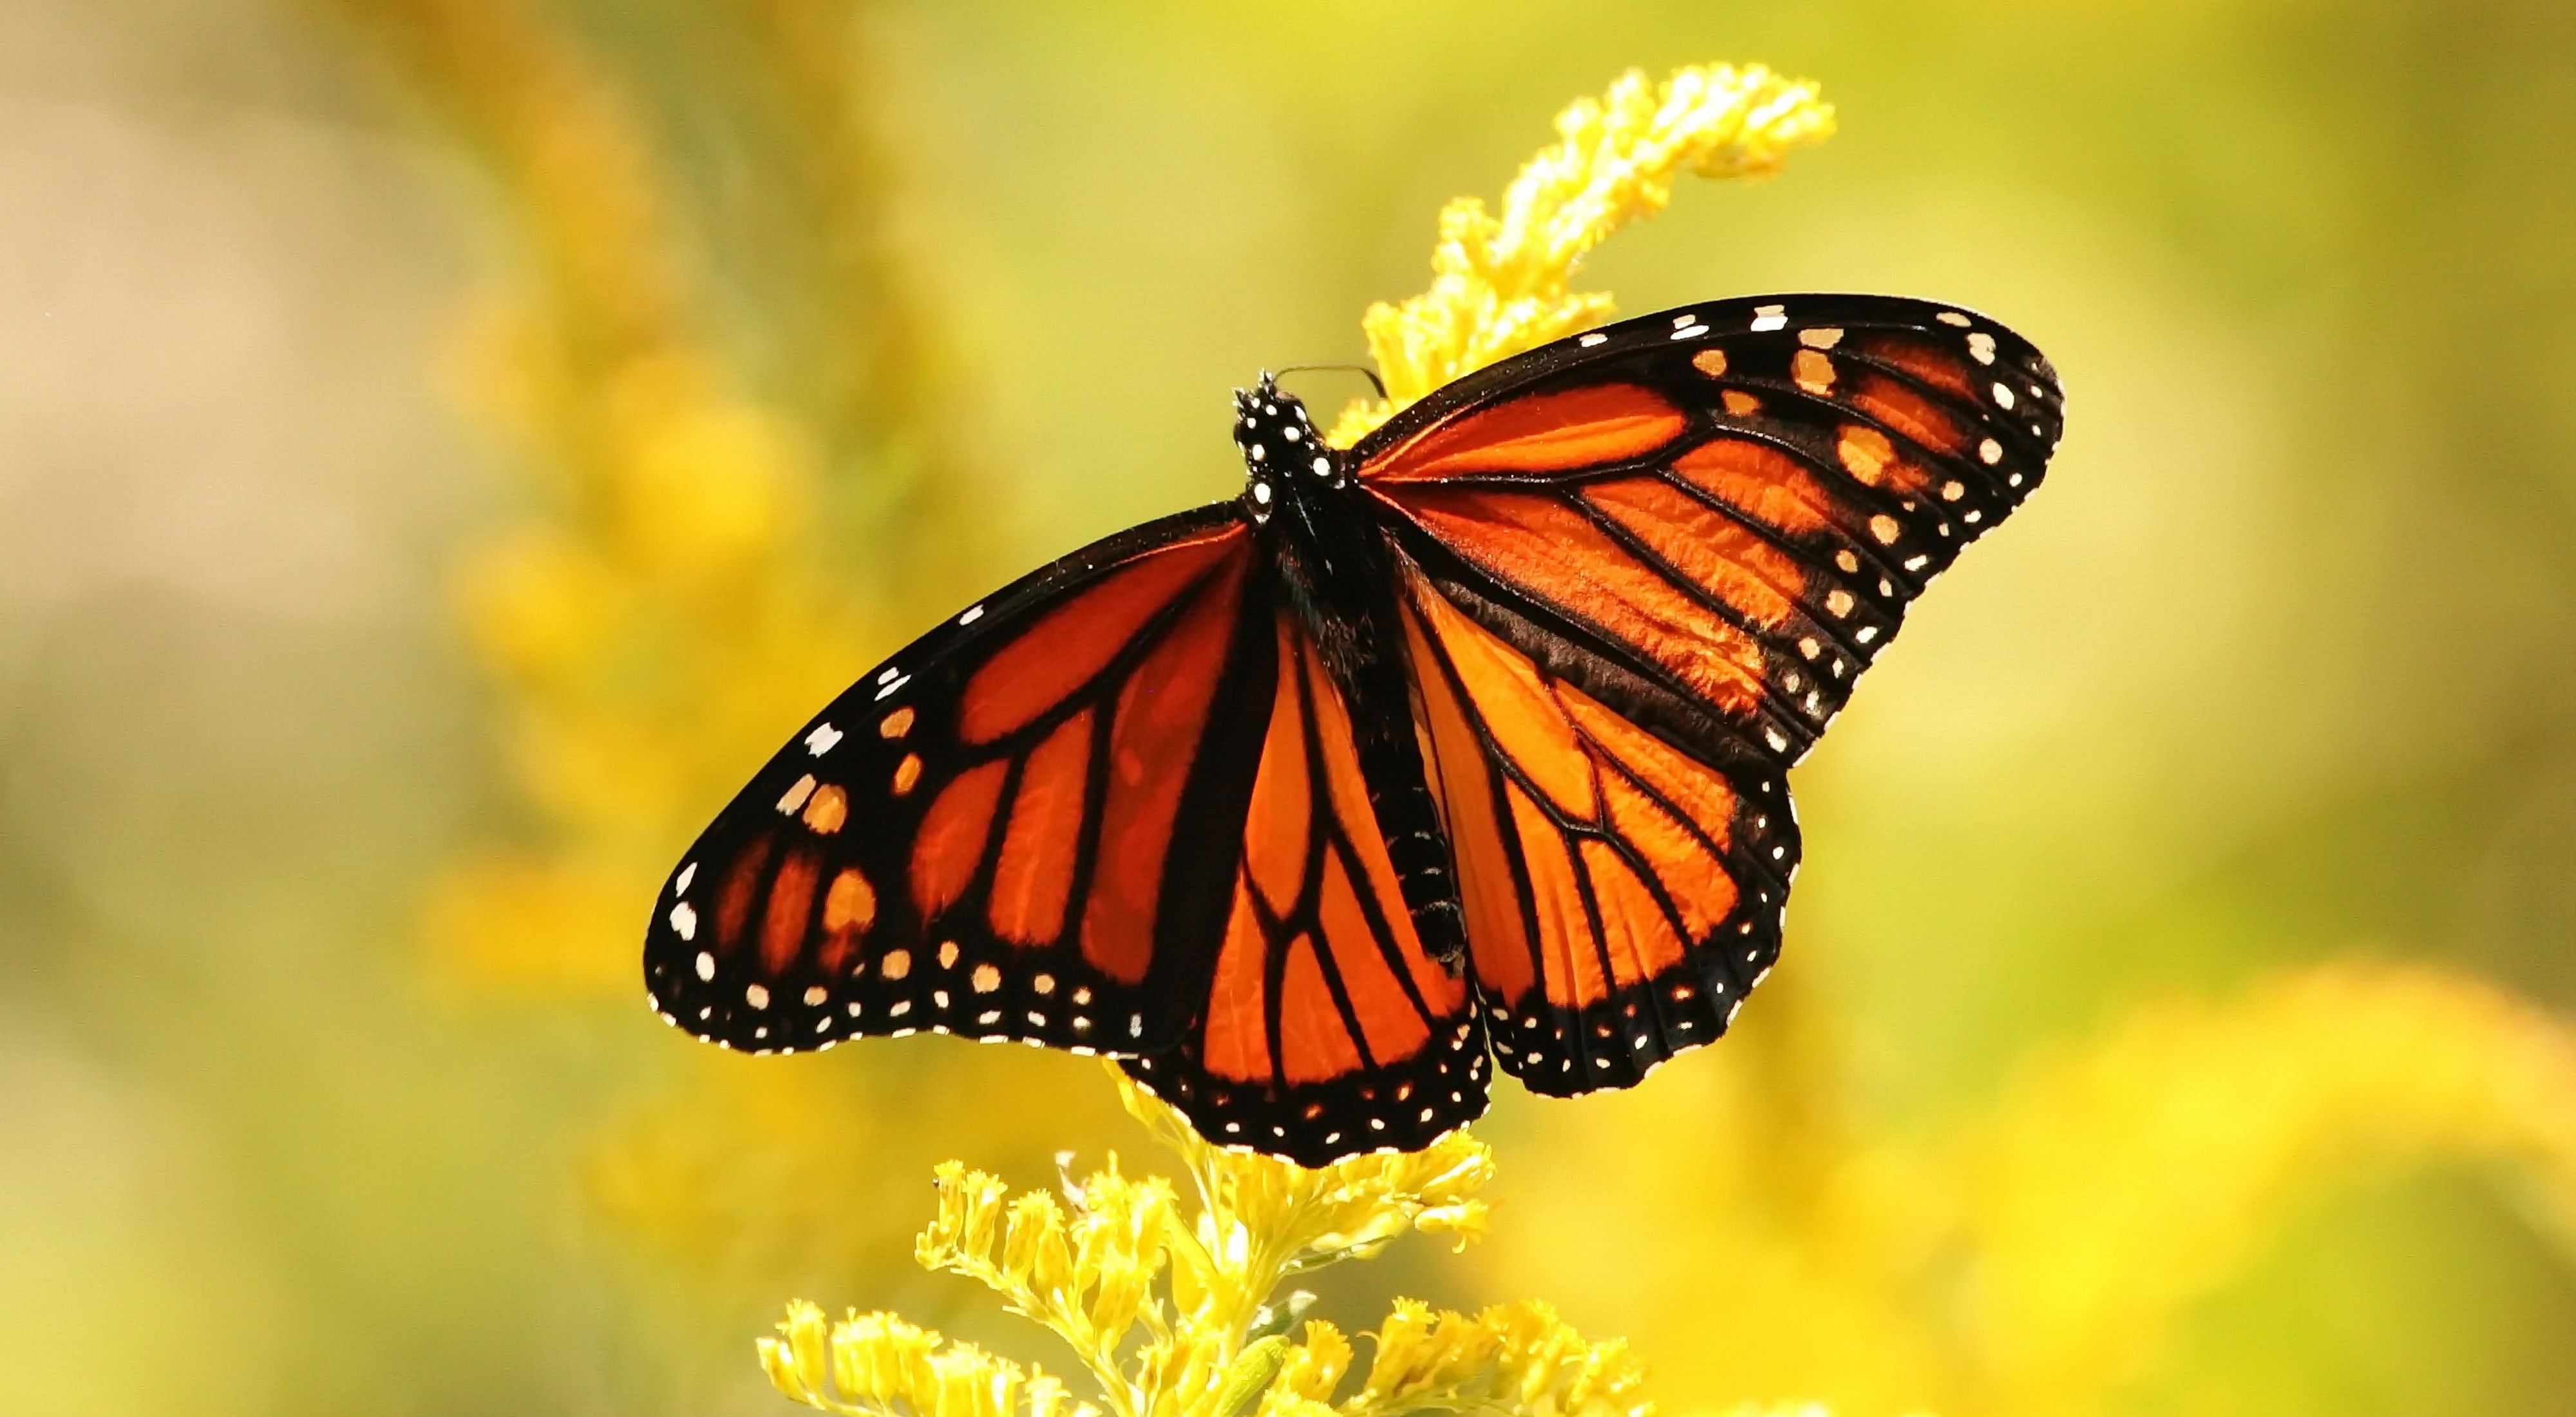 A monarch butterfly with spread wings on goldenrod flowers.